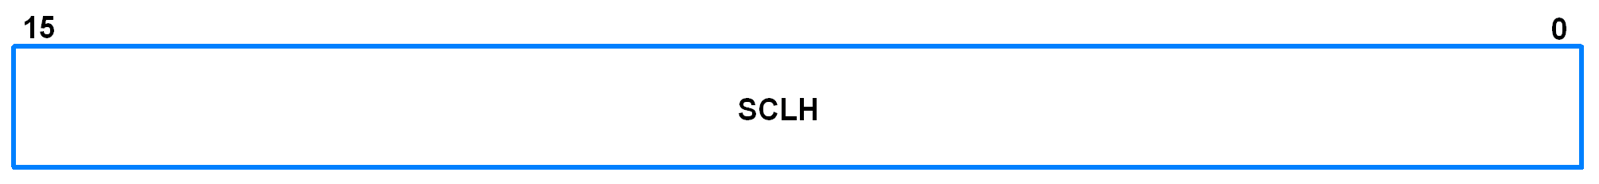 I2C0SCLH (I2C0 SCL High Duty Cycle Register)